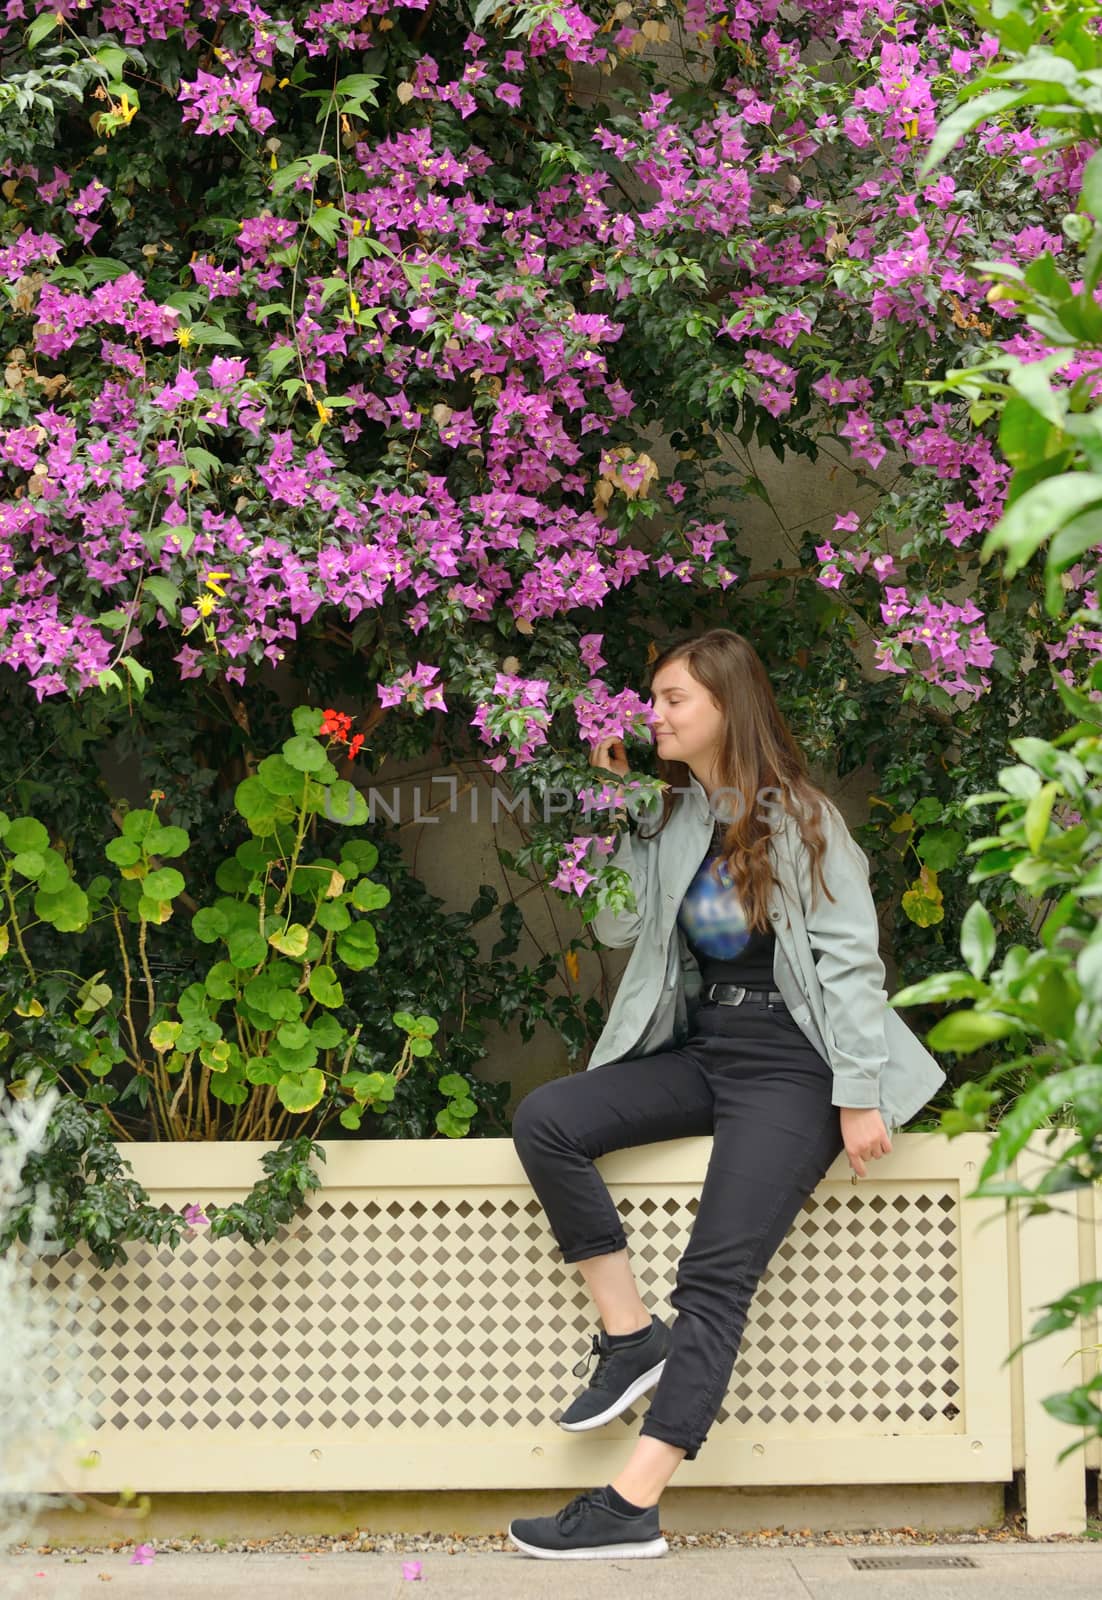 Teen girl and bougainvillea flowers in garden by mady70